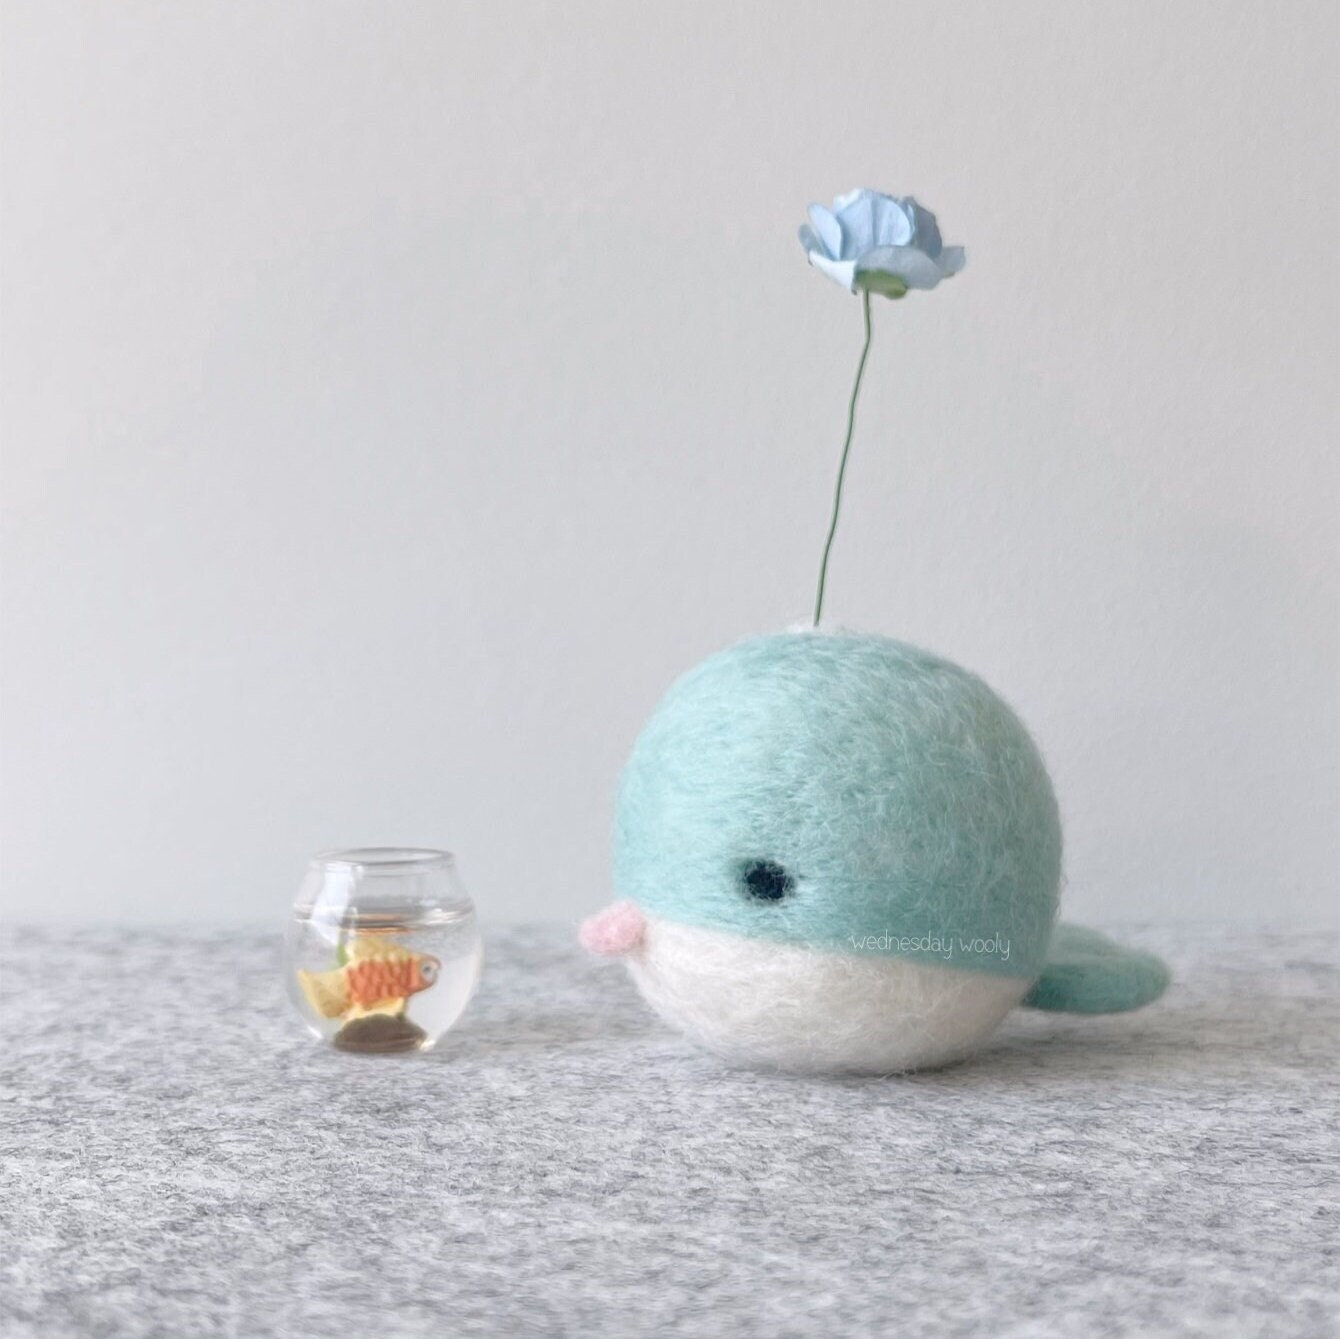 Needle Felted Narwhal Kit, Felted Wool Animal, Needle Felting Kit Whale,  DIY Felting Kit for Beginners, Make Your Own Whale, Kids Gift 